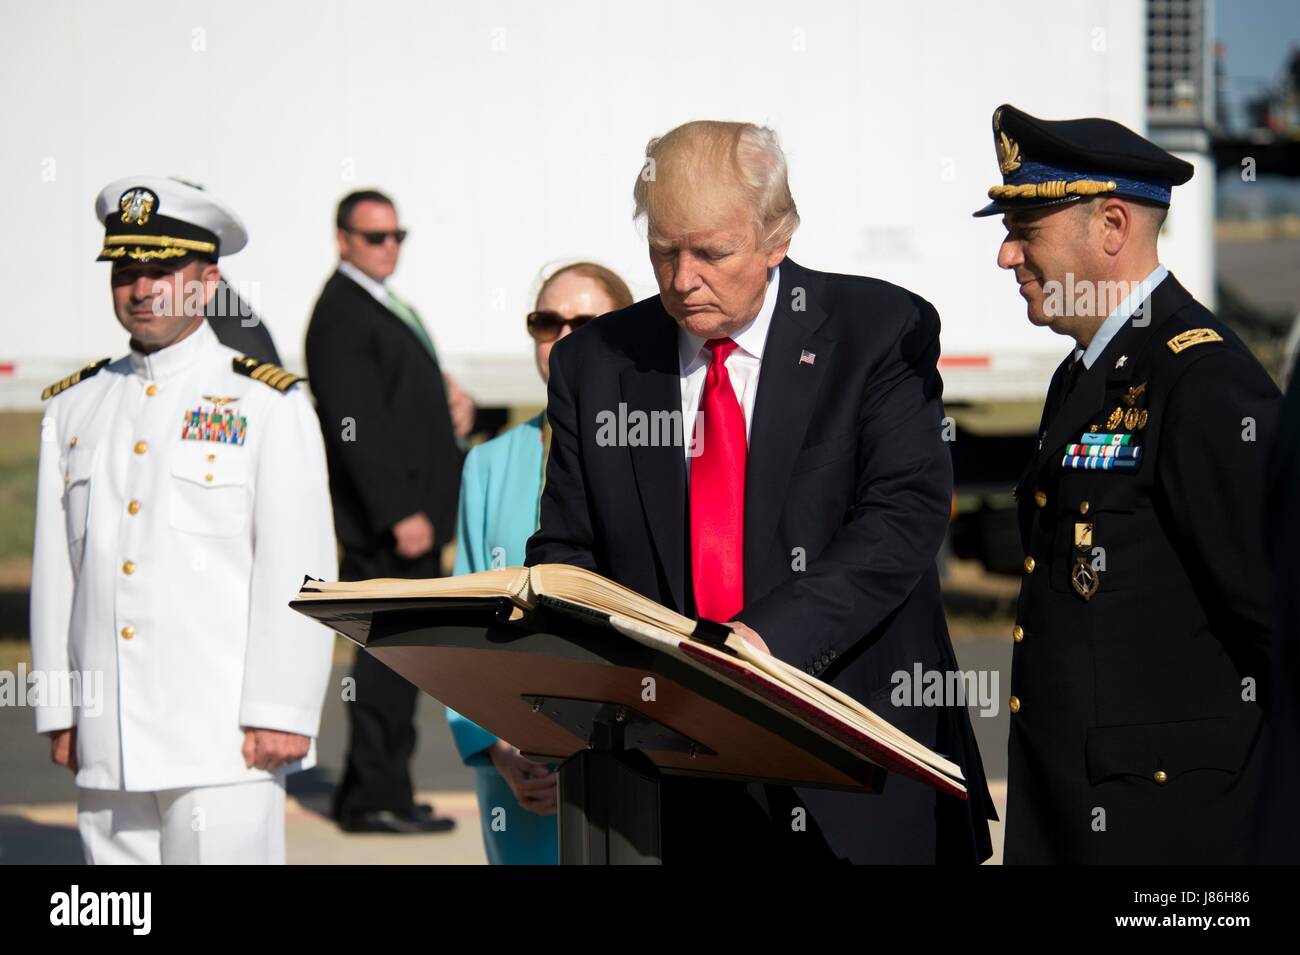 U.S. President Donald Trump signs the Albo d’Onore, the Sigonella Italian Air Force base guest book during a stopover to visit Naval Air Station Sigonella before returning home from his nine-day overseas trip May 27, 2017 in Sigonella, Italy. Stock Photo